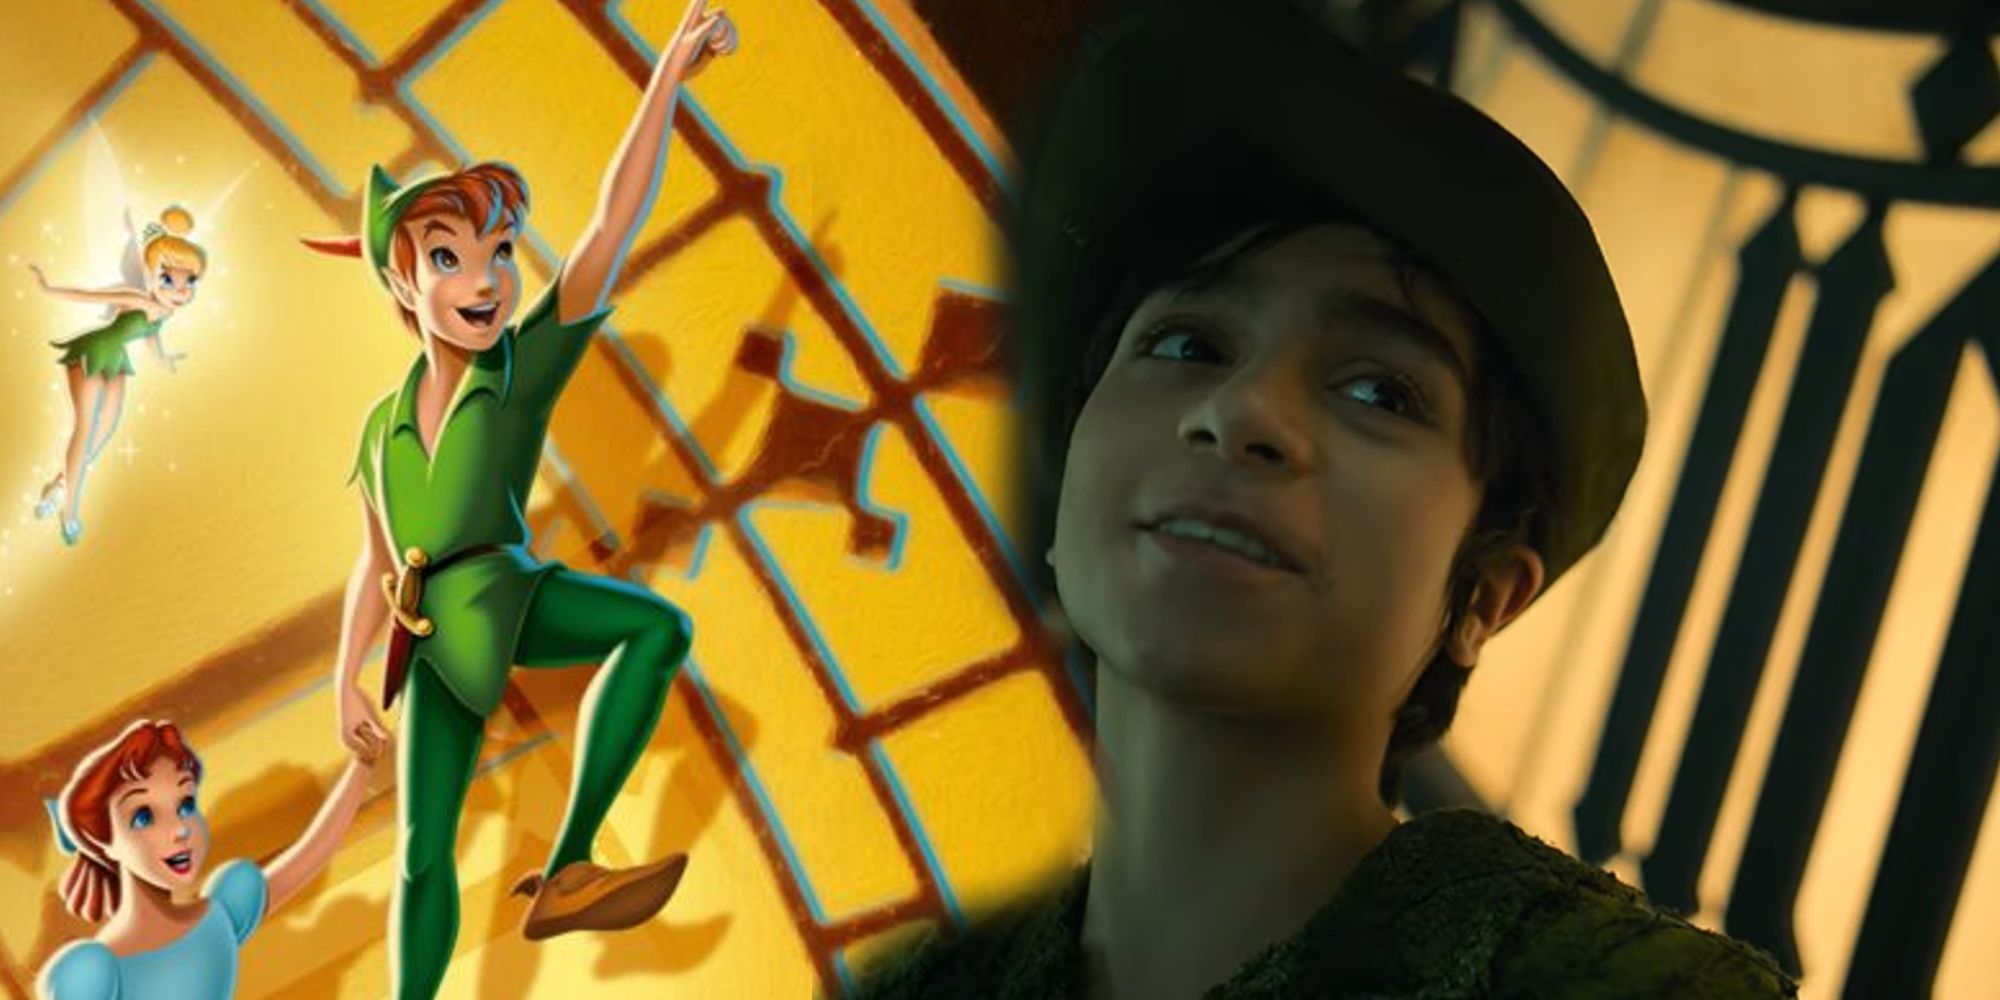 Peter Pan and Wendy' movie: Biggest changes from Disney animated film